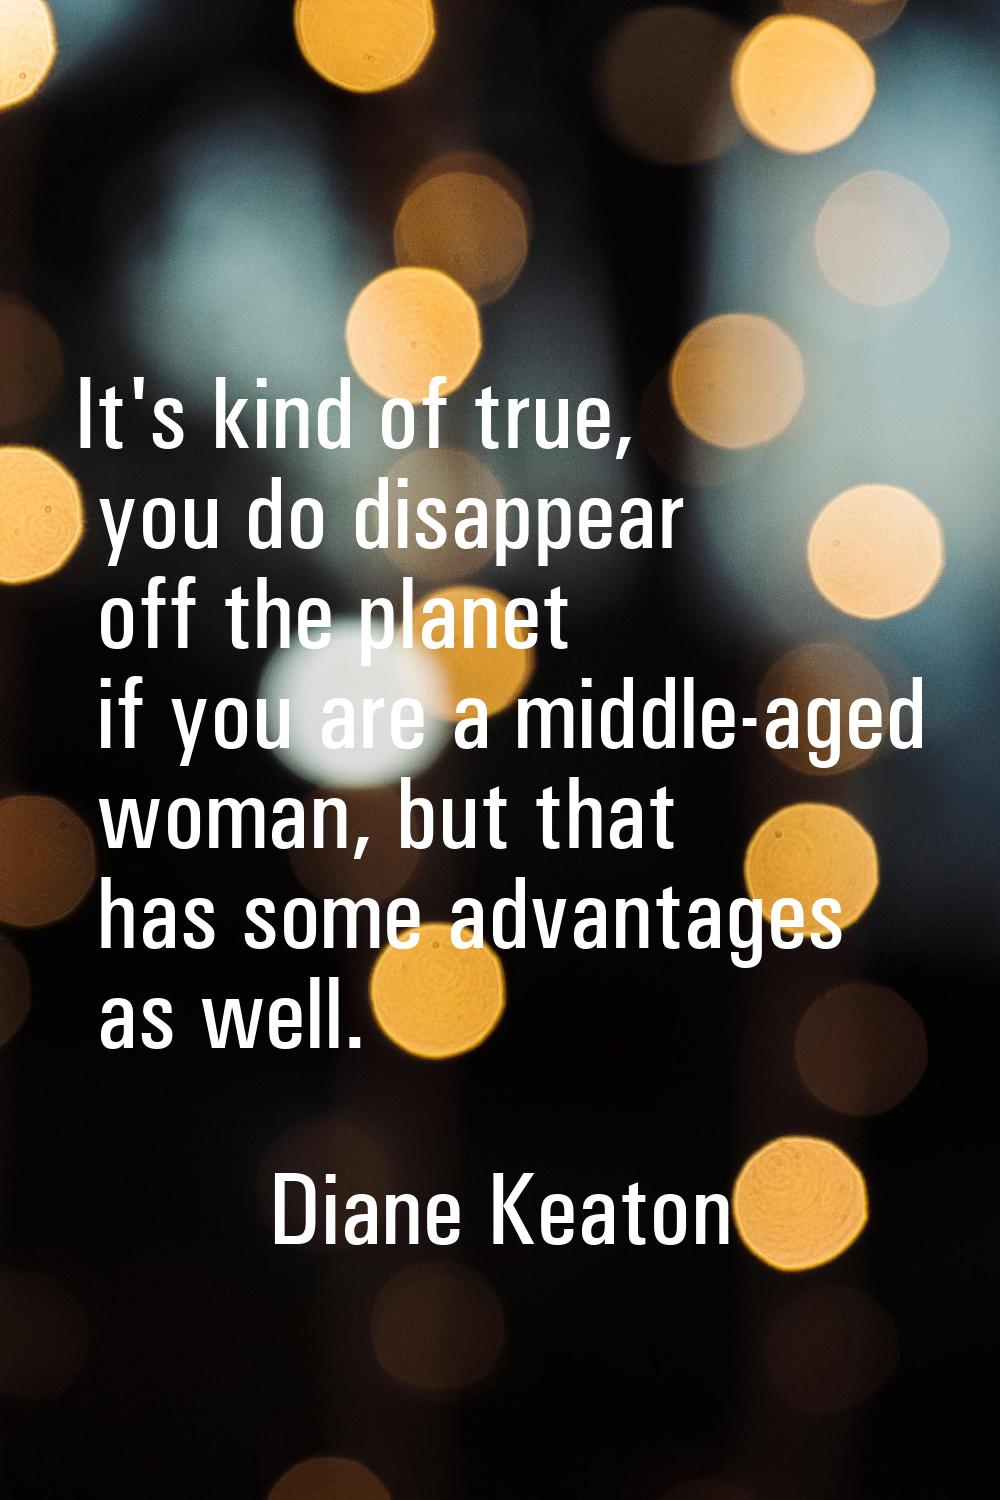 It's kind of true, you do disappear off the planet if you are a middle-aged woman, but that has som